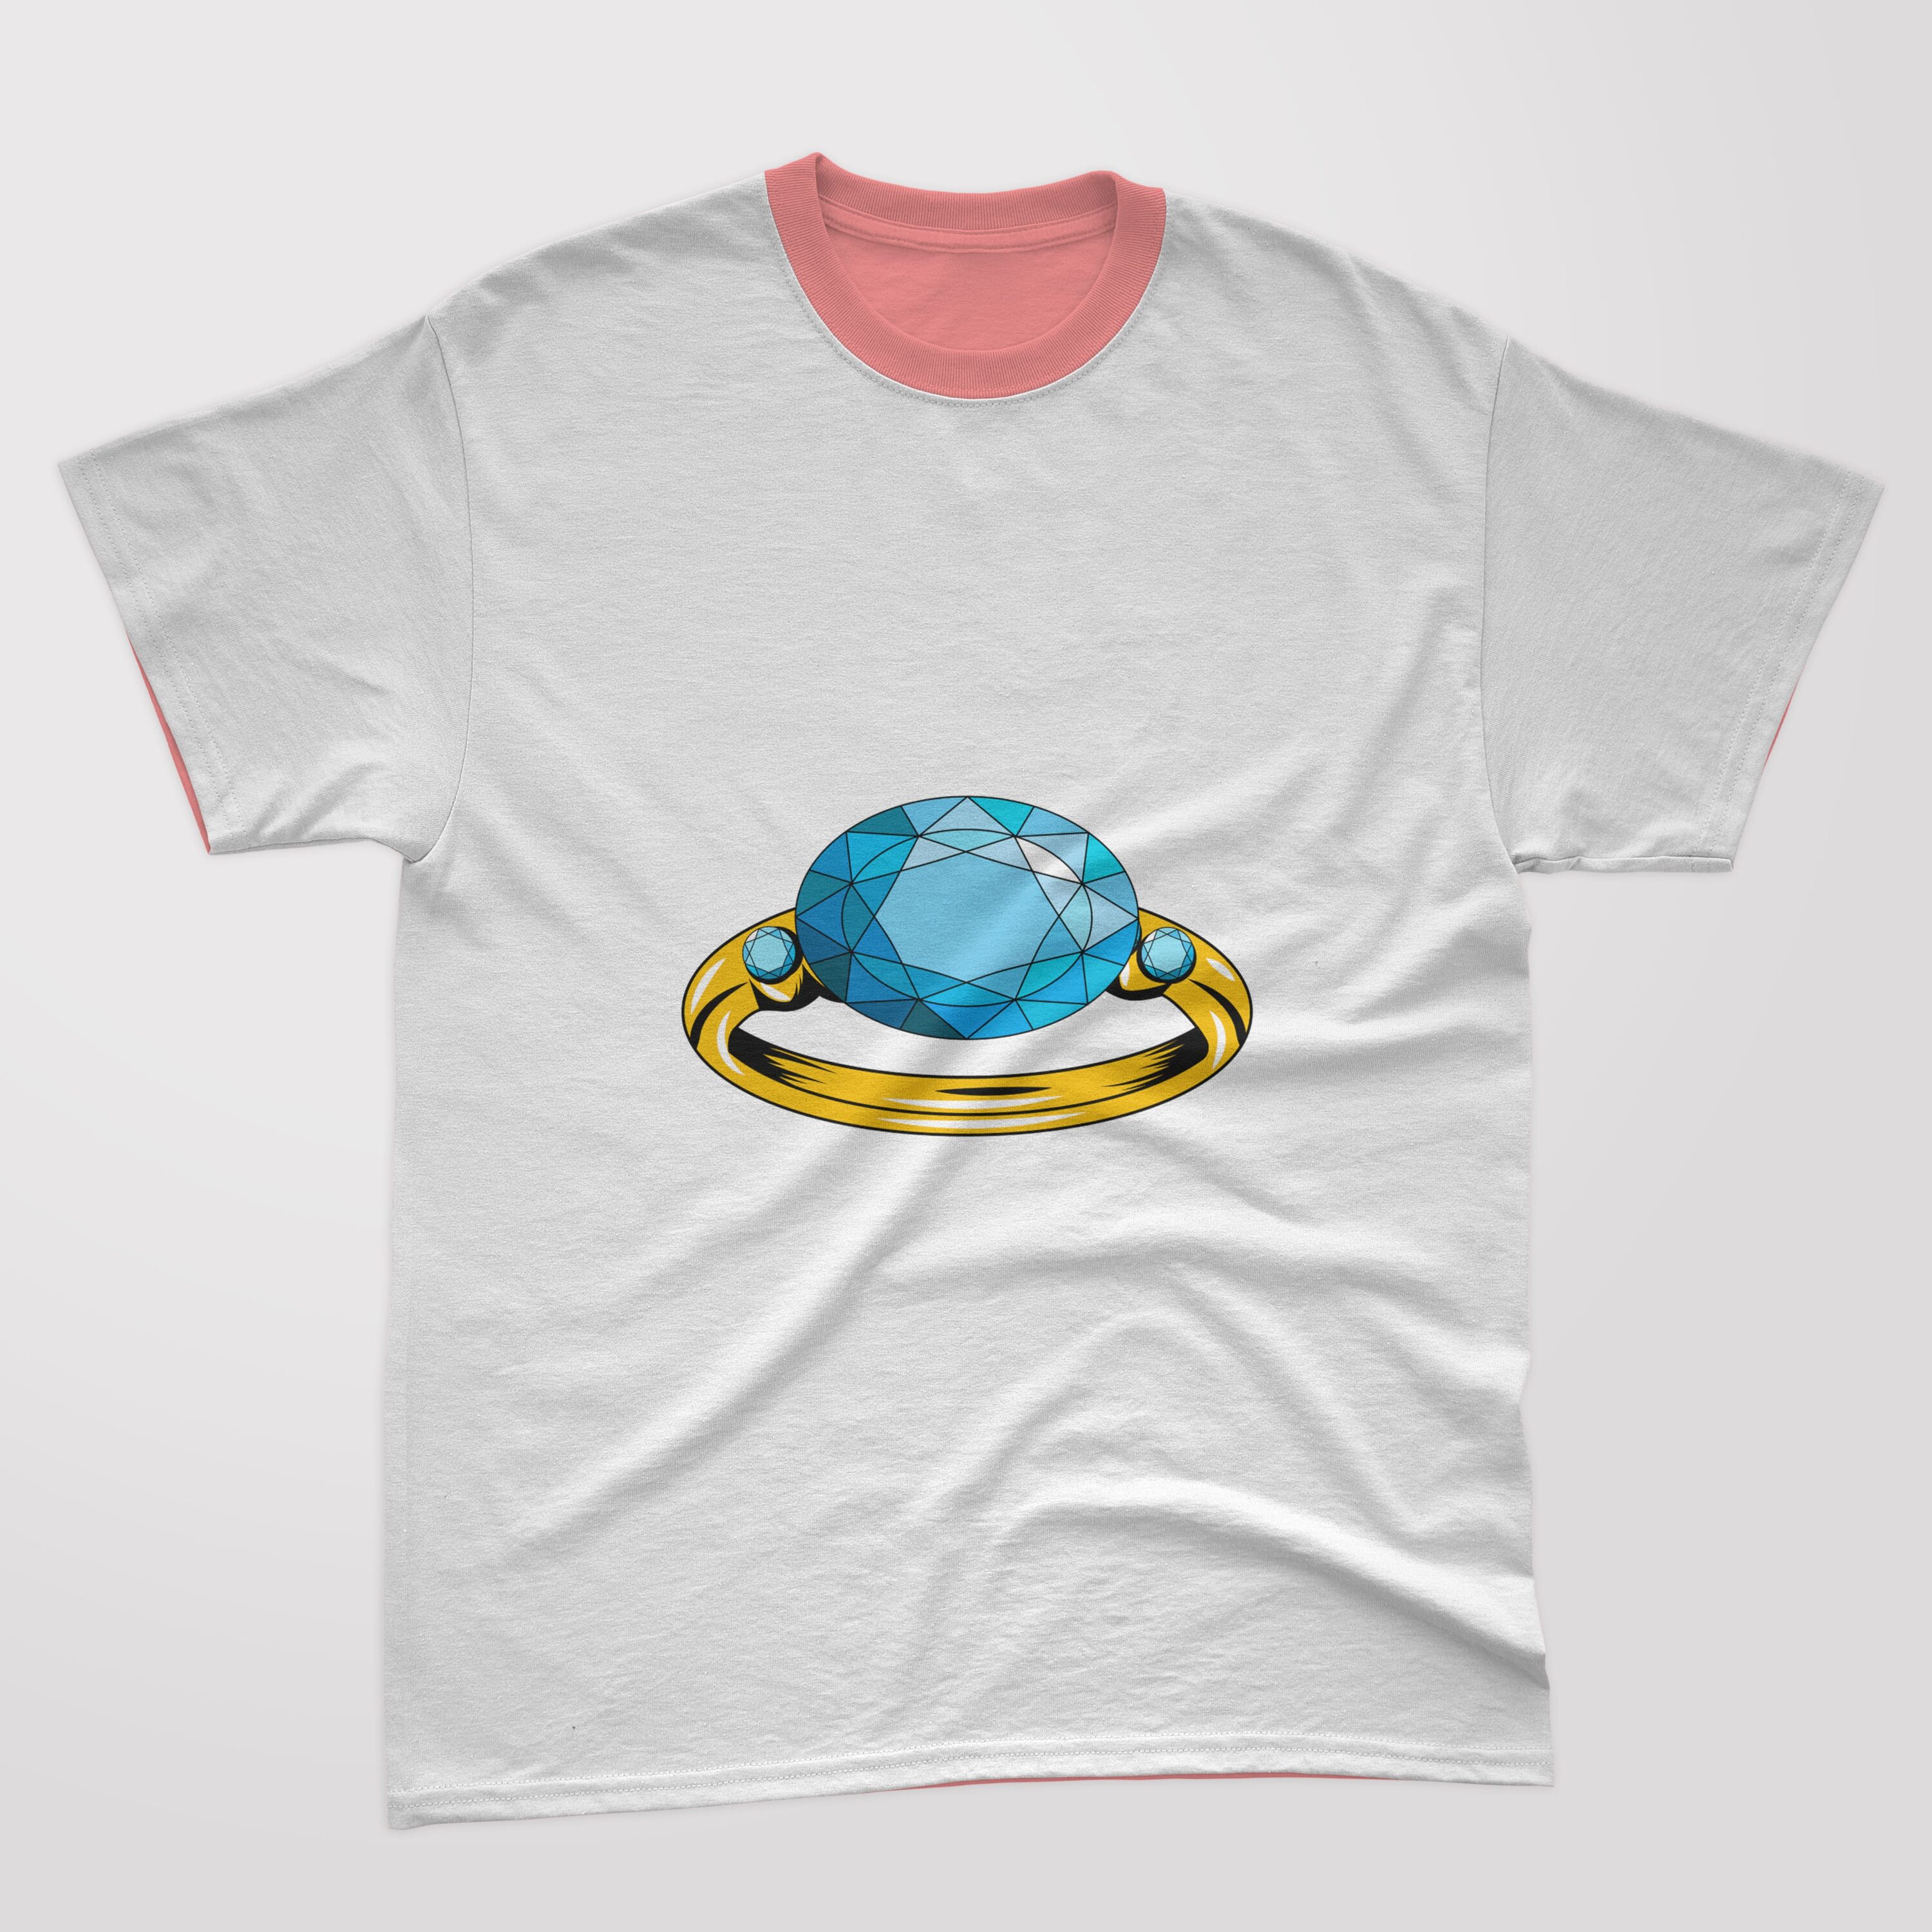 Image of a T-shirt with an irresistible diamond ring print.